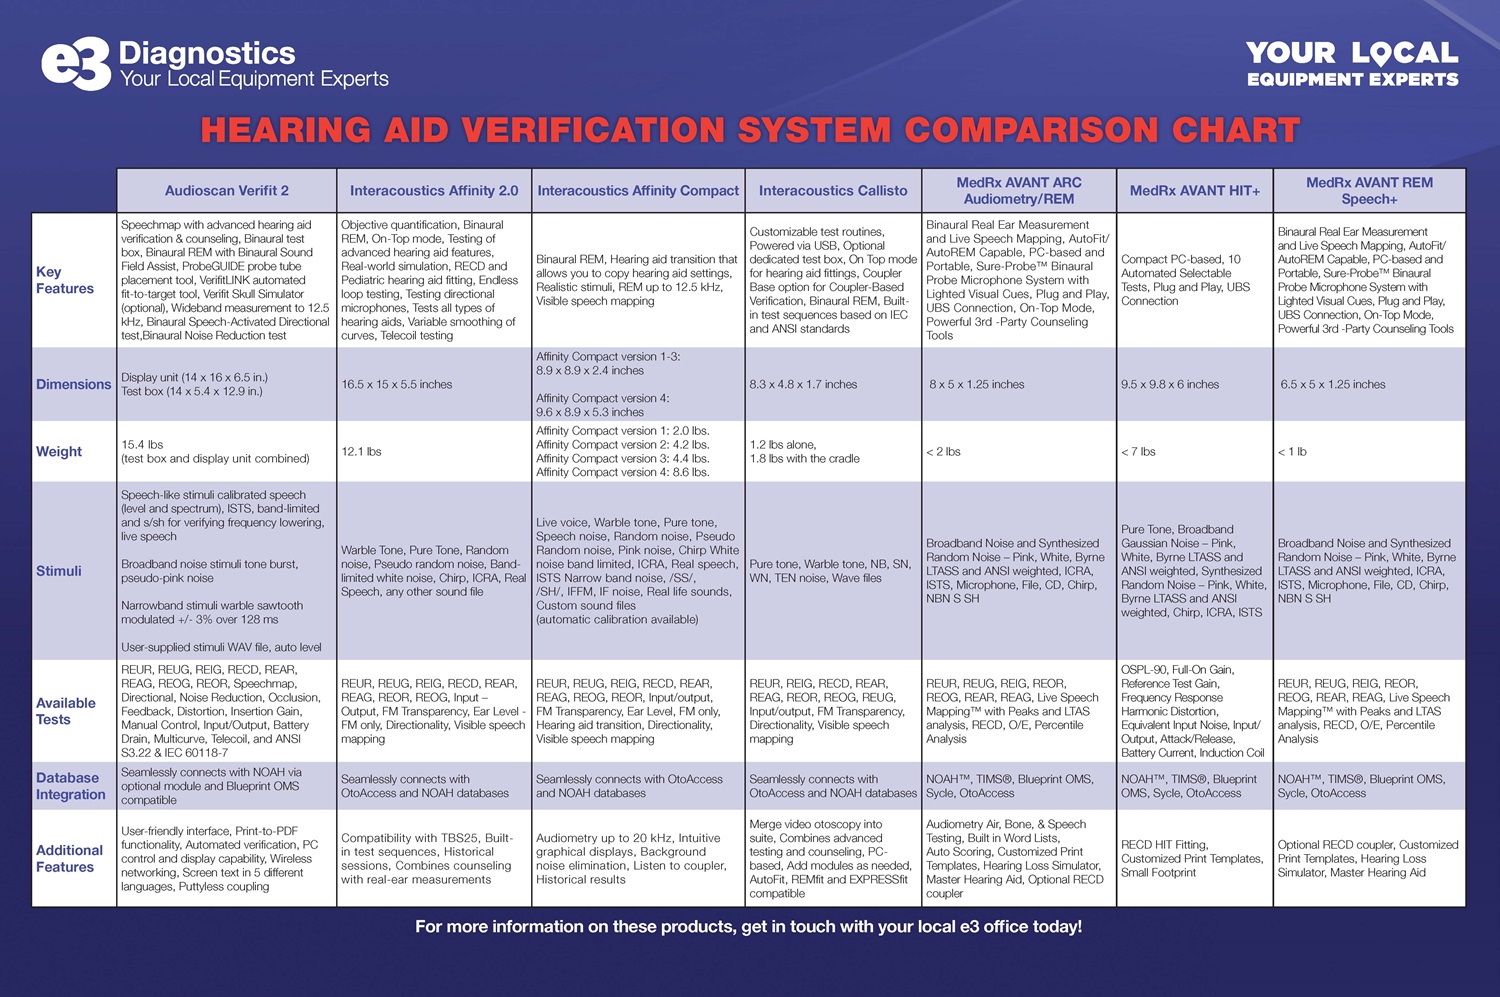 Check Out Our New Hearing Aid Verification Comparison Chart!